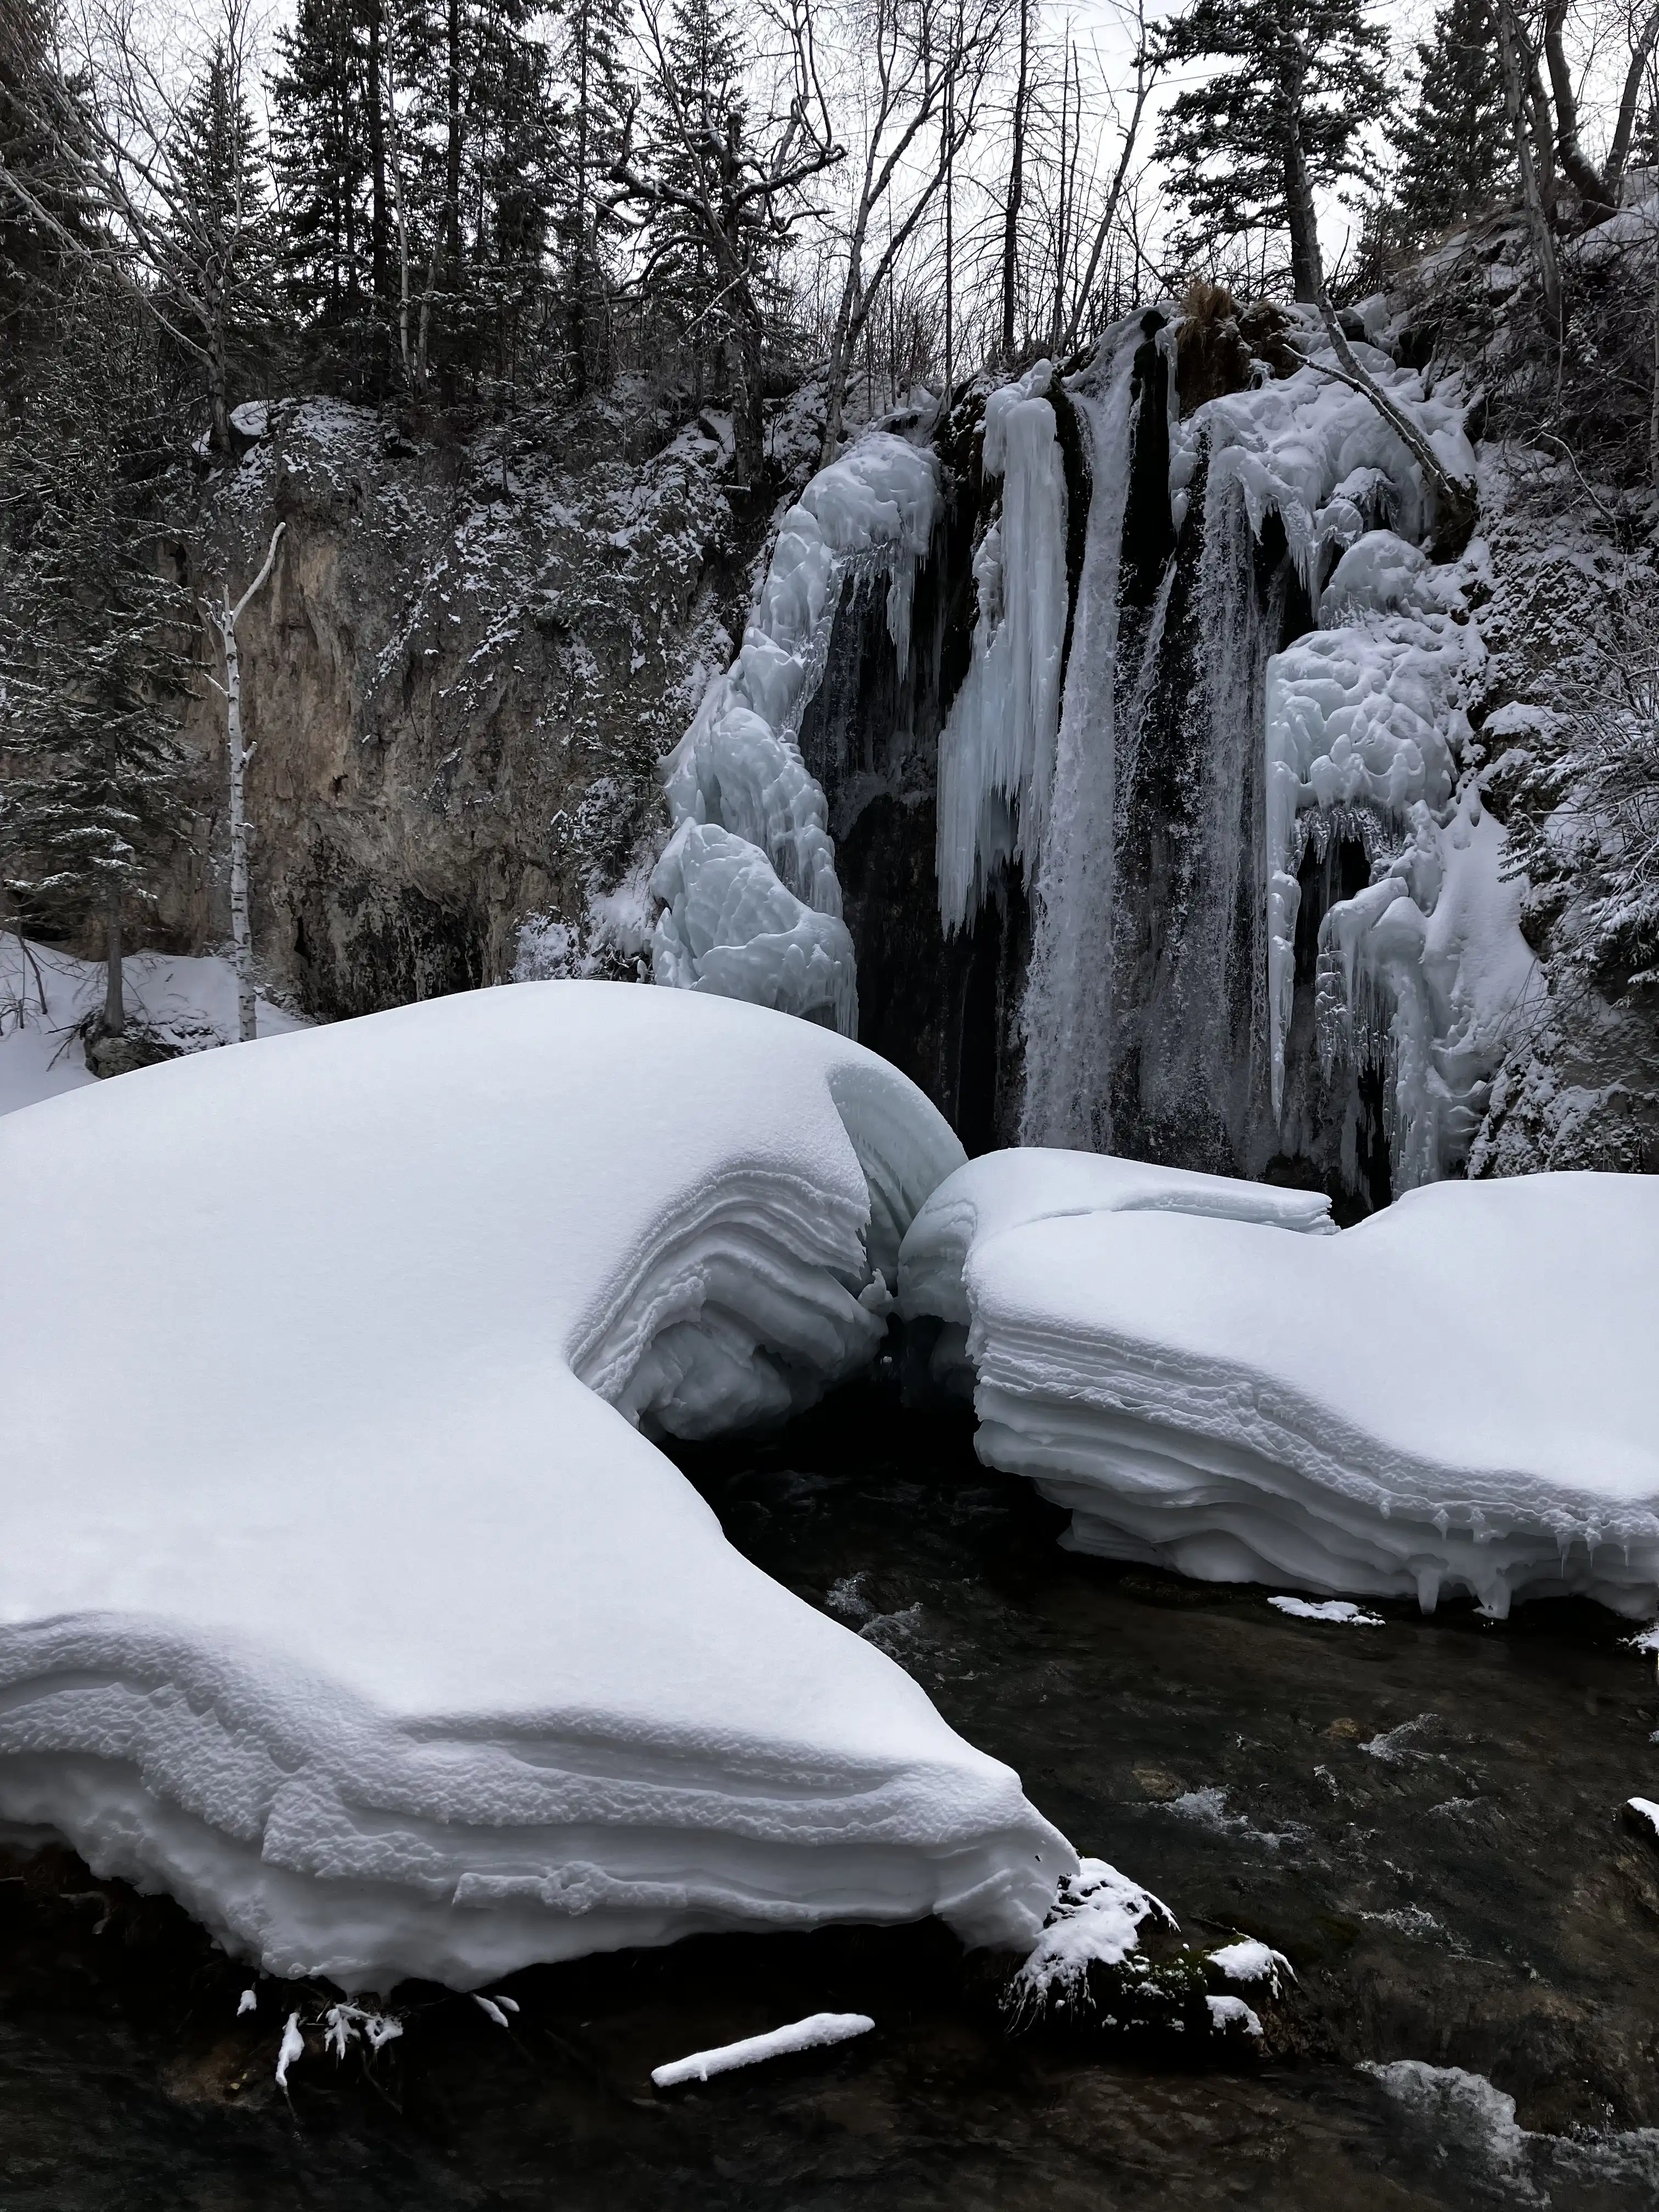 An ice-covered waterfall. The ice spreads like angel's wings to the left and right, and there's a canyon cut through the snow.